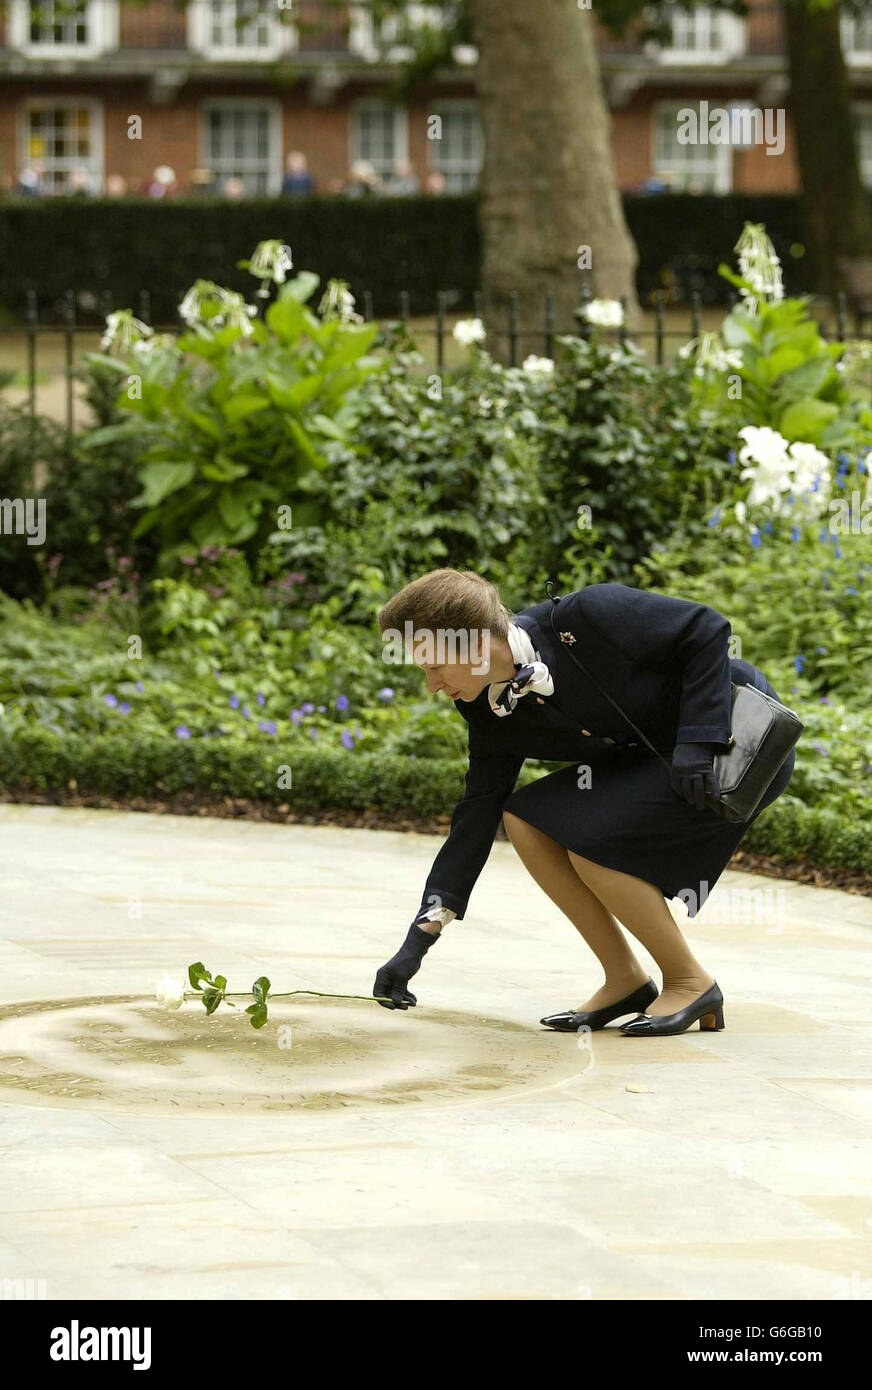 The Princess Royal lays a single rose at the memorial garden in Grosvenor Square, London, dedicated to the memory of those who died when two hijacked passenger jets that crashed into the twin towers of New York's World Trade Center. * The garden of remembrance contains a small pavilion bearing three bronze plaques, listing the names of victims for the UK, UK Overseas Territories and those with dual nationalities. Stock Photo